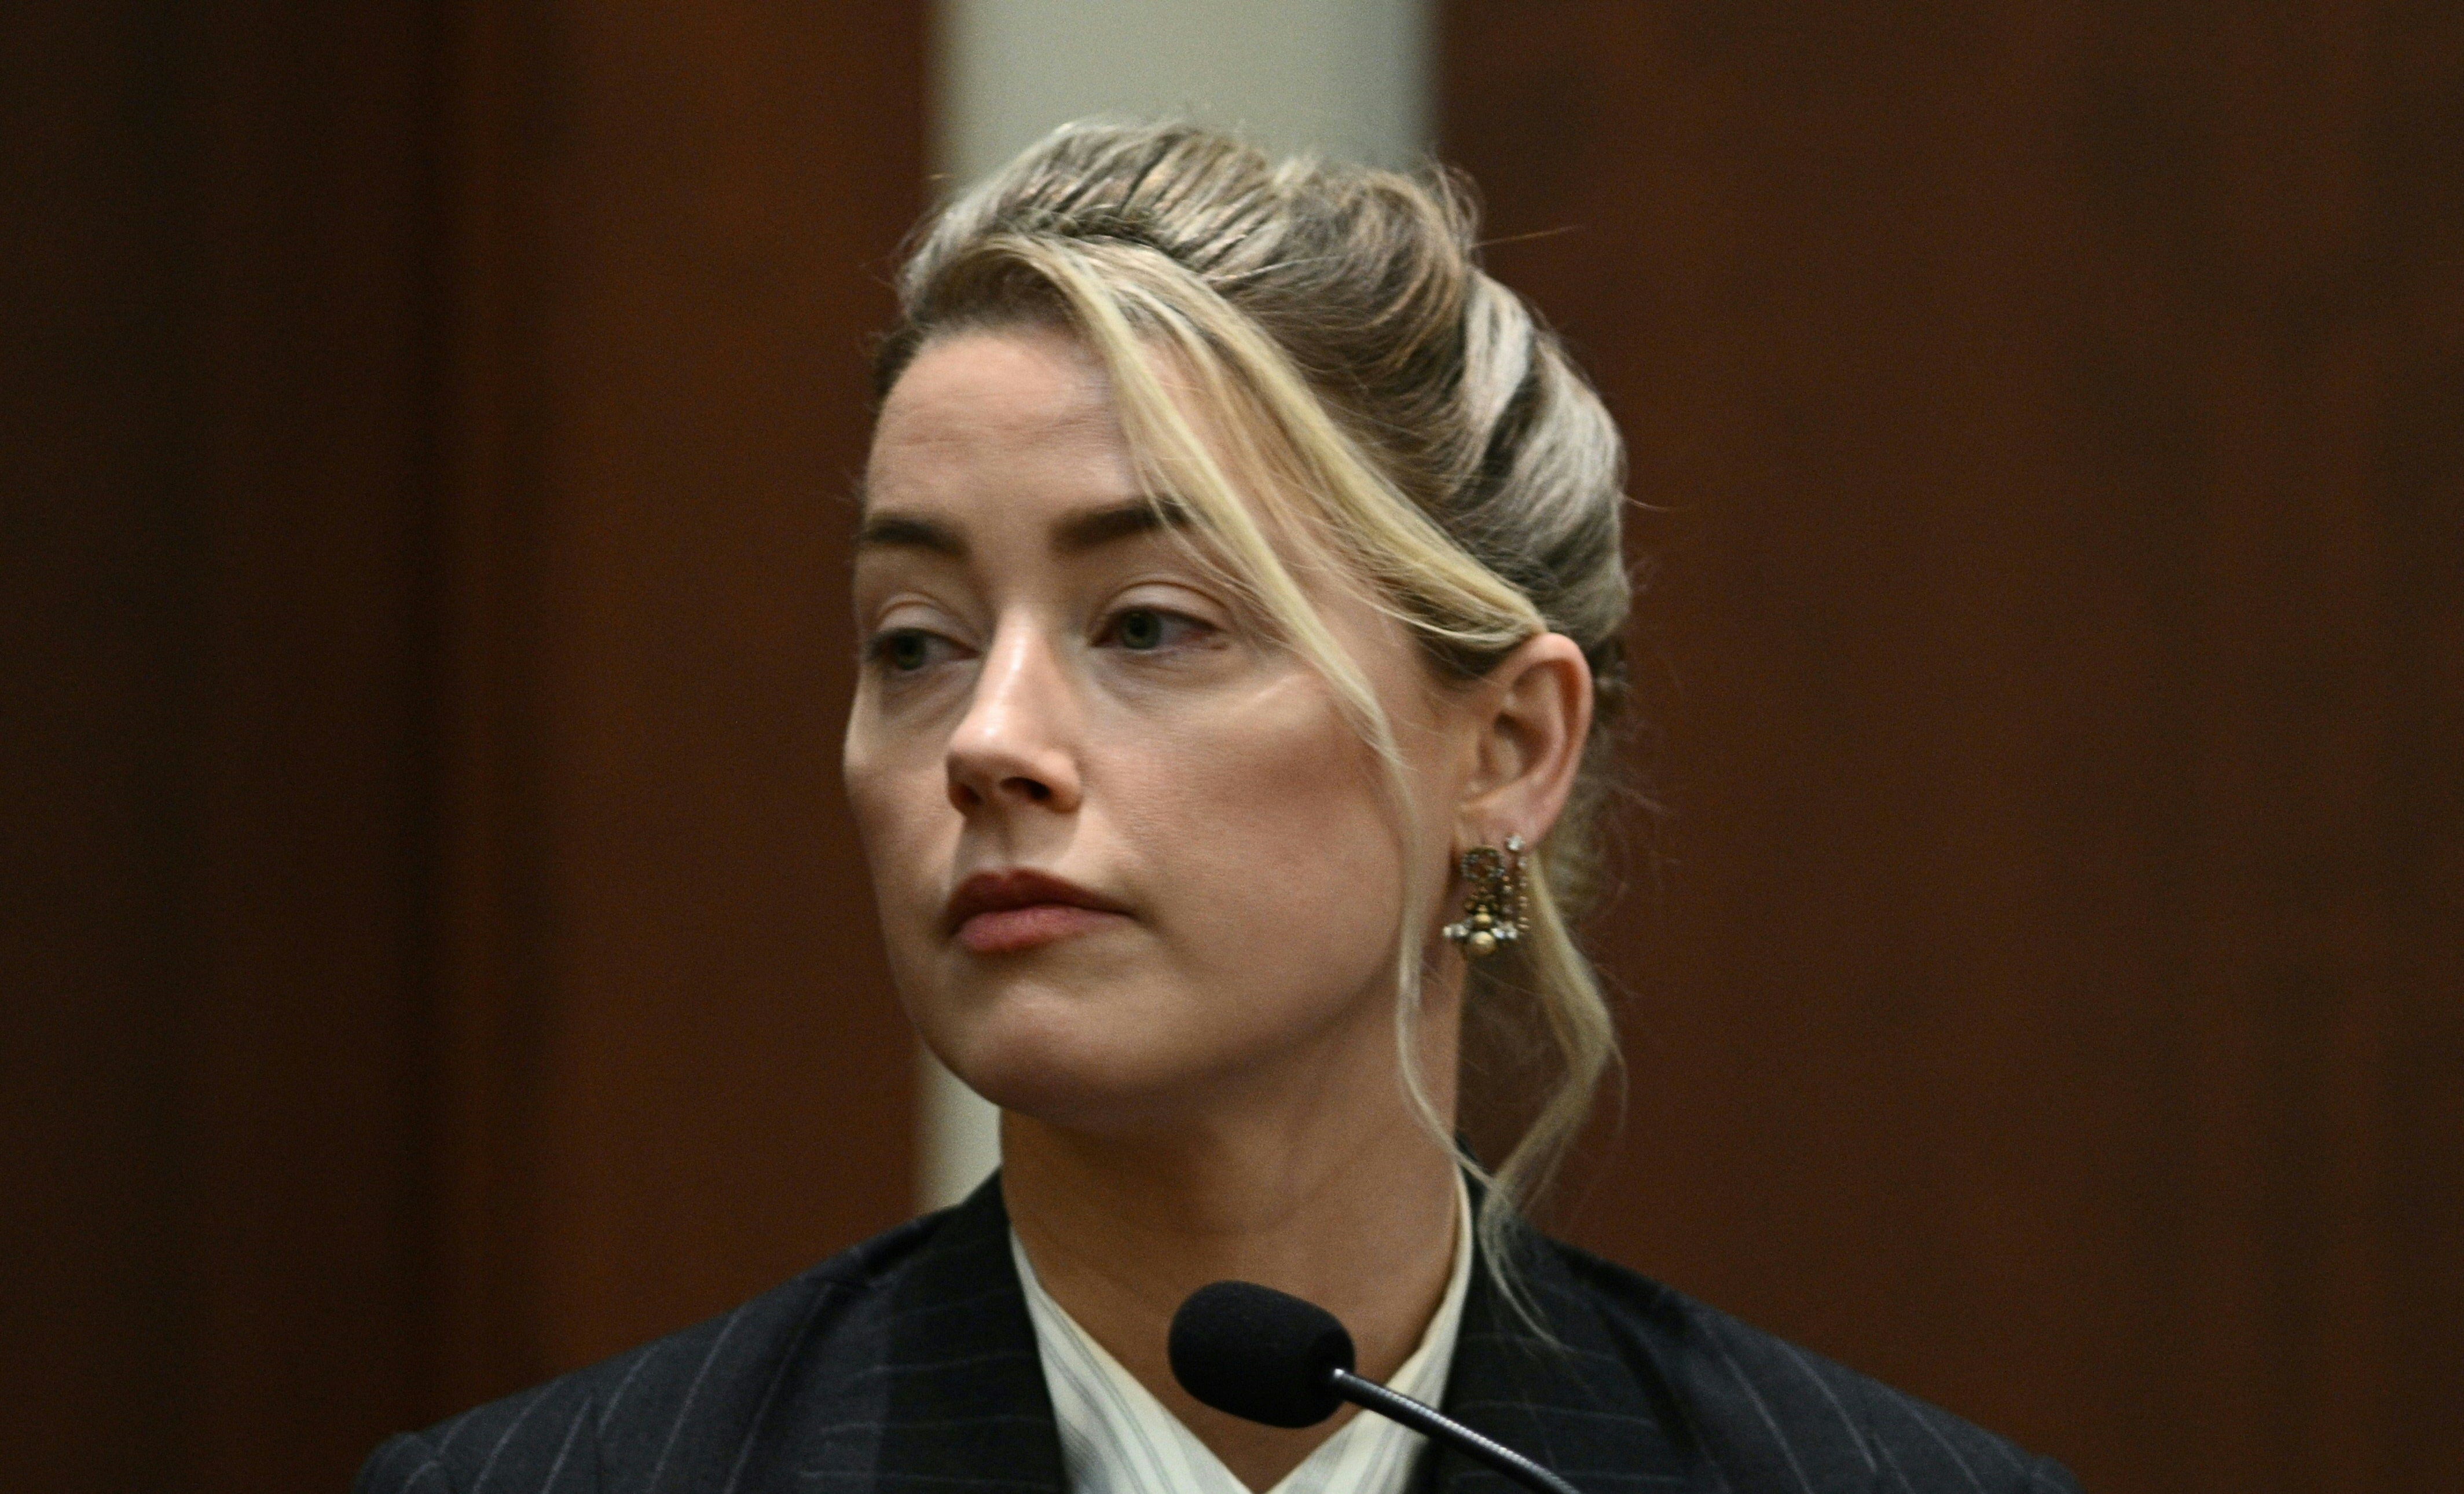 Amber Heard leaves stand after tense cross-exam by Johnny Depp’s lawyers